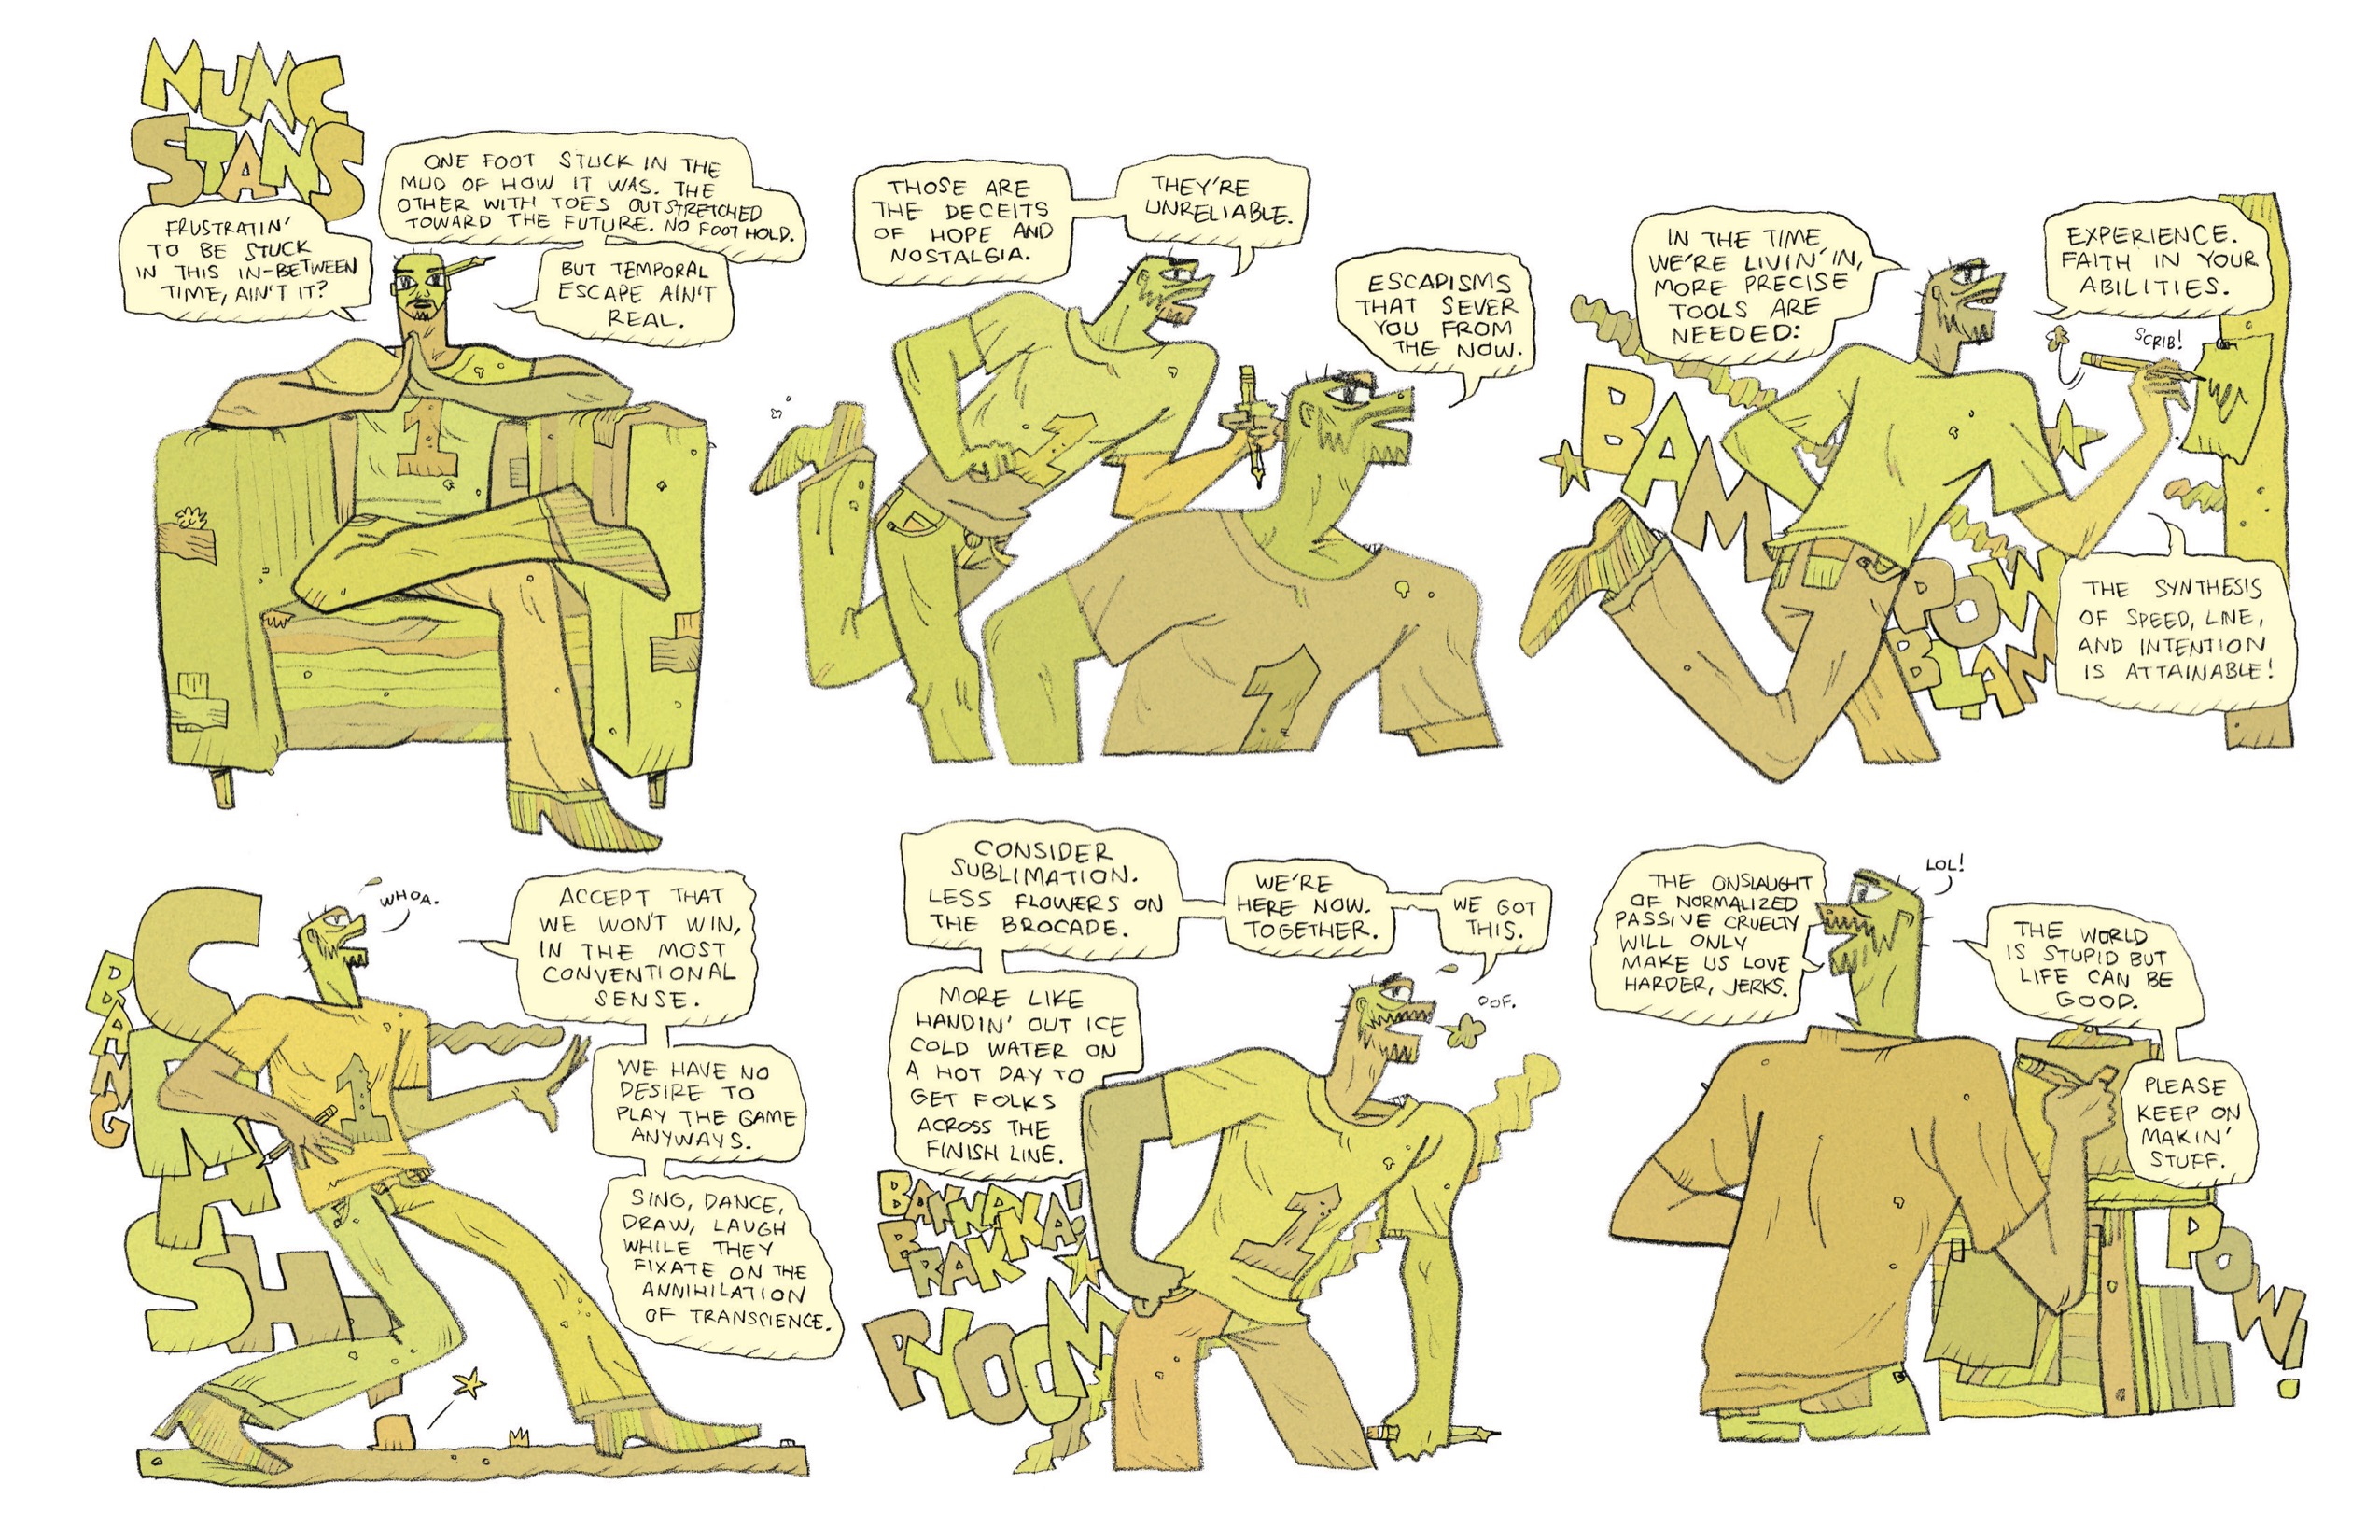 This comic deviates from the others in this collection in that there are six panels on the page rather than three, and they are colored in various shades of yellow and orange. It is titled in block letters, â€œNunc Stans.â€
1. Derek sits in his beat up armchair, looking ahead at the reader. He rests one ankle over his knee, and holds both hands together under his chin. He is wearing his regular outfit: his number 1 t-shirt, jeans, and heeled boots. There is a large pencil tucked behind his ear. He has a serious expression on his face as he begins his monologue, â€œFrustratinâ€™ to be stuck in this in-between time, ainâ€™t it? One foot stuck in the mud of how it was. The other with toes outstretched toward the future. No foothold. But temporal escape ainâ€™t real. 
2. Derek is drawn twice in this panel. In the first, he is running dramatically, facing the right of the page. He is now gripping the pencil in his left hand as he charges forward, one leg kicked back as high as his waist. He says, â€œThose are the receipts of hope and nostalgia. Theyâ€™re unreliable.â€ We then zoom in a bit closer on Derek, so we just see him from the elbows up. His brows are furrowed now as he continues, â€œEscapisms that sever you from the now.â€
3. Now from slightly behind, we see Derek running still charging forward, now aiming his pencil for a sheet of paper nailed to a post in front of him. His mouth is open wider now, as if heâ€™s talking louder. In the background are lines of smoke and the sounds of explosions: â€œBAM! POW! BLAM!â€ Derek continues, â€œIn the time weâ€™re livinâ€™ in, more precise tools are needed: Experience. Faith in your abilities. The synthesis of speed, line, and intention is attainable!â€ 
4. Derek stops running, now standing with his weight leaning backwards, as if stopped suddenly and standing back in fear of something ahead of him. He is leaning against large block letters, stacked vertically the same height as Derek: â€œBANG! CRASH!â€ He is looking up, eyes wide and mouth agape. He sweats and lets out a â€œwhoa.â€ then continues his monologue, â€œAccept that we wonâ€™t win, in the most conventional sense. We have no desire to play the game anyways. Sing, dance, draw, laugh while they fixate on the annihilation of transience.â€ 
5. Derek now leans his weight forward, bending over slightly and huffing out in exhaustion, â€œOof.â€ He grips his pencil in his left hand at his side; his right hand is on his hip. Behind him, loud noises continue: â€œBAKKA BRAKKA! PYOOMâ€ A line of smoke stretches out diagonally behind him. He says, â€œConsider sublimation. Less flowers on the brocade. More like handinâ€™ out ice cold water on a hot day to get folks across the finish line. Weâ€™re here now. Together. We got this.â€
6. From behind, we see Derek standing in front of an easel-like structure, with a paper clipped upright to a clipboard, and two sheets of paper taped below it on a wooden base. He turns his head to the side, looking slightly behind him. Smiling, he says, â€œThe onslaught of normalized passive cruelty will only make us love harder, jerks. LOL! The world is stupid but life can be good. Please keep on makinâ€™ stuff.â€ In the background is a lone â€œPOW!â€ 